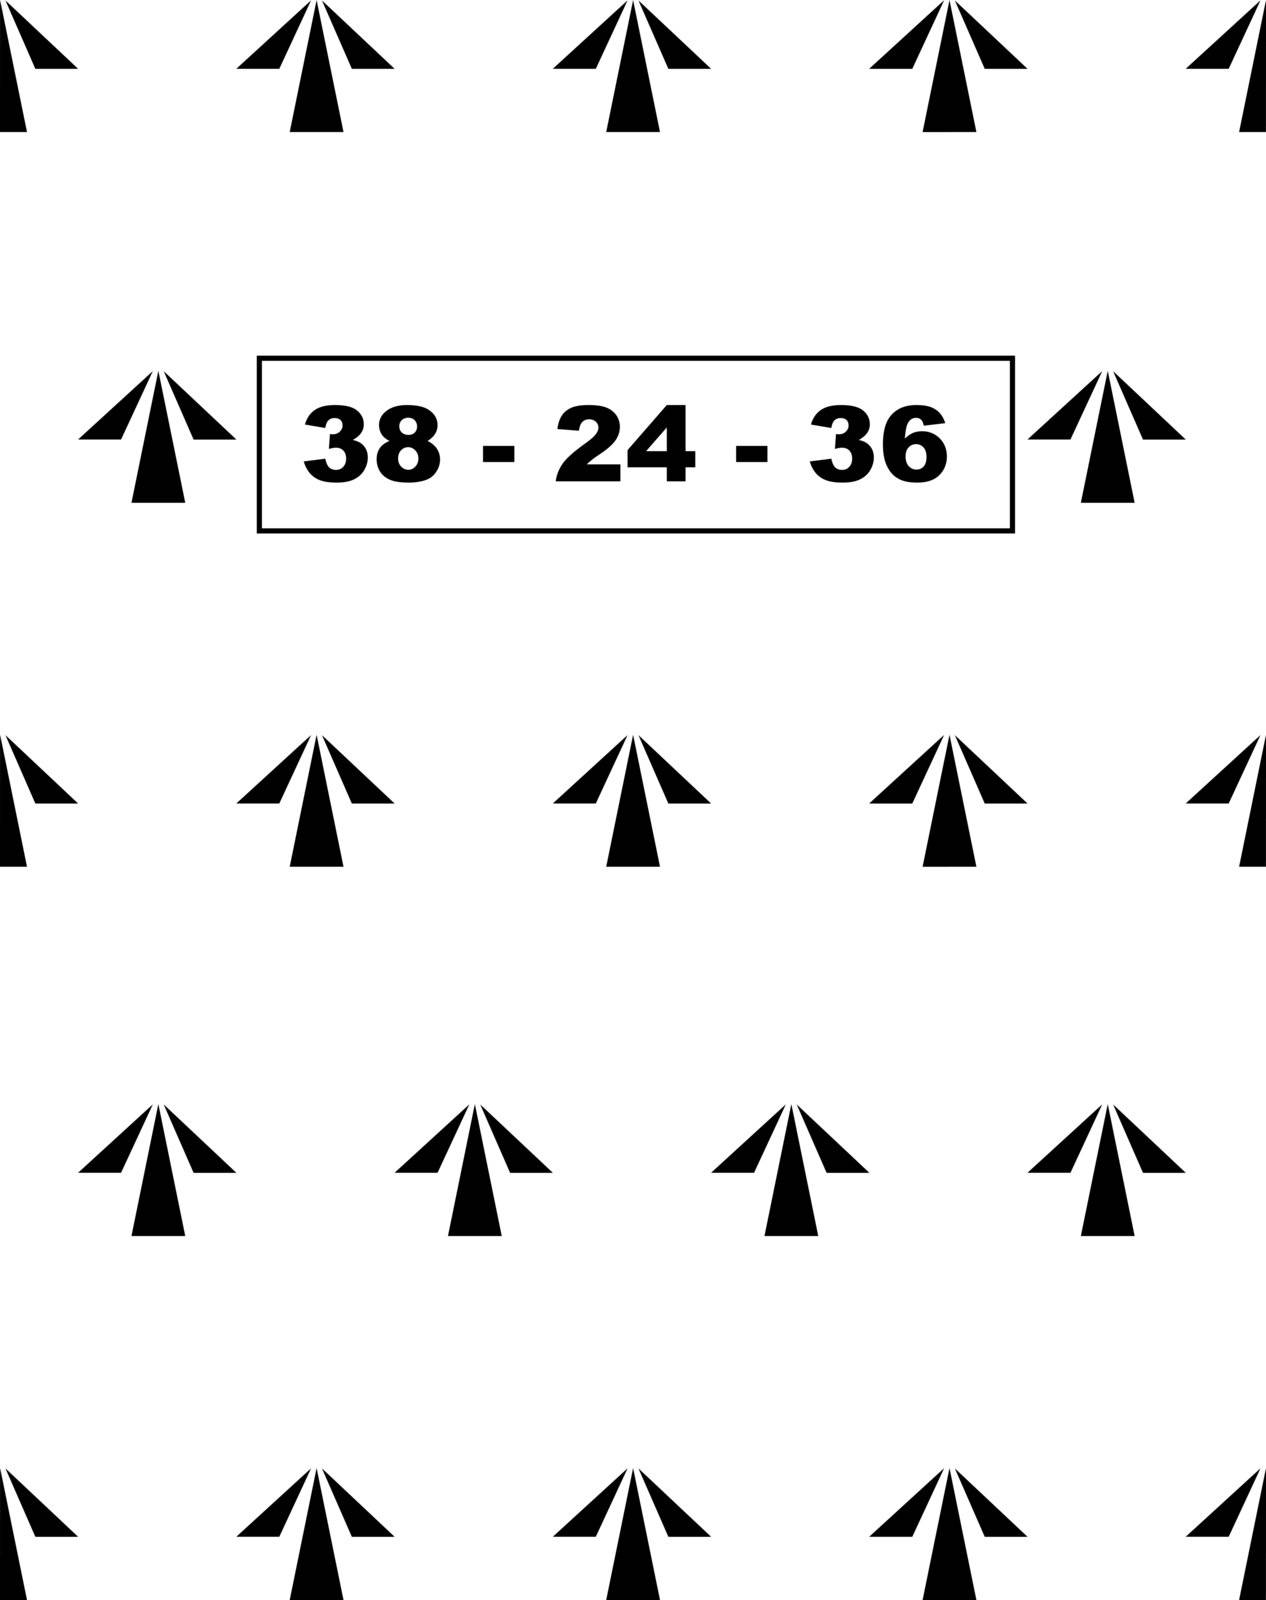 A comic version of the old prison uniform arrows - the numbers representing vital statistice